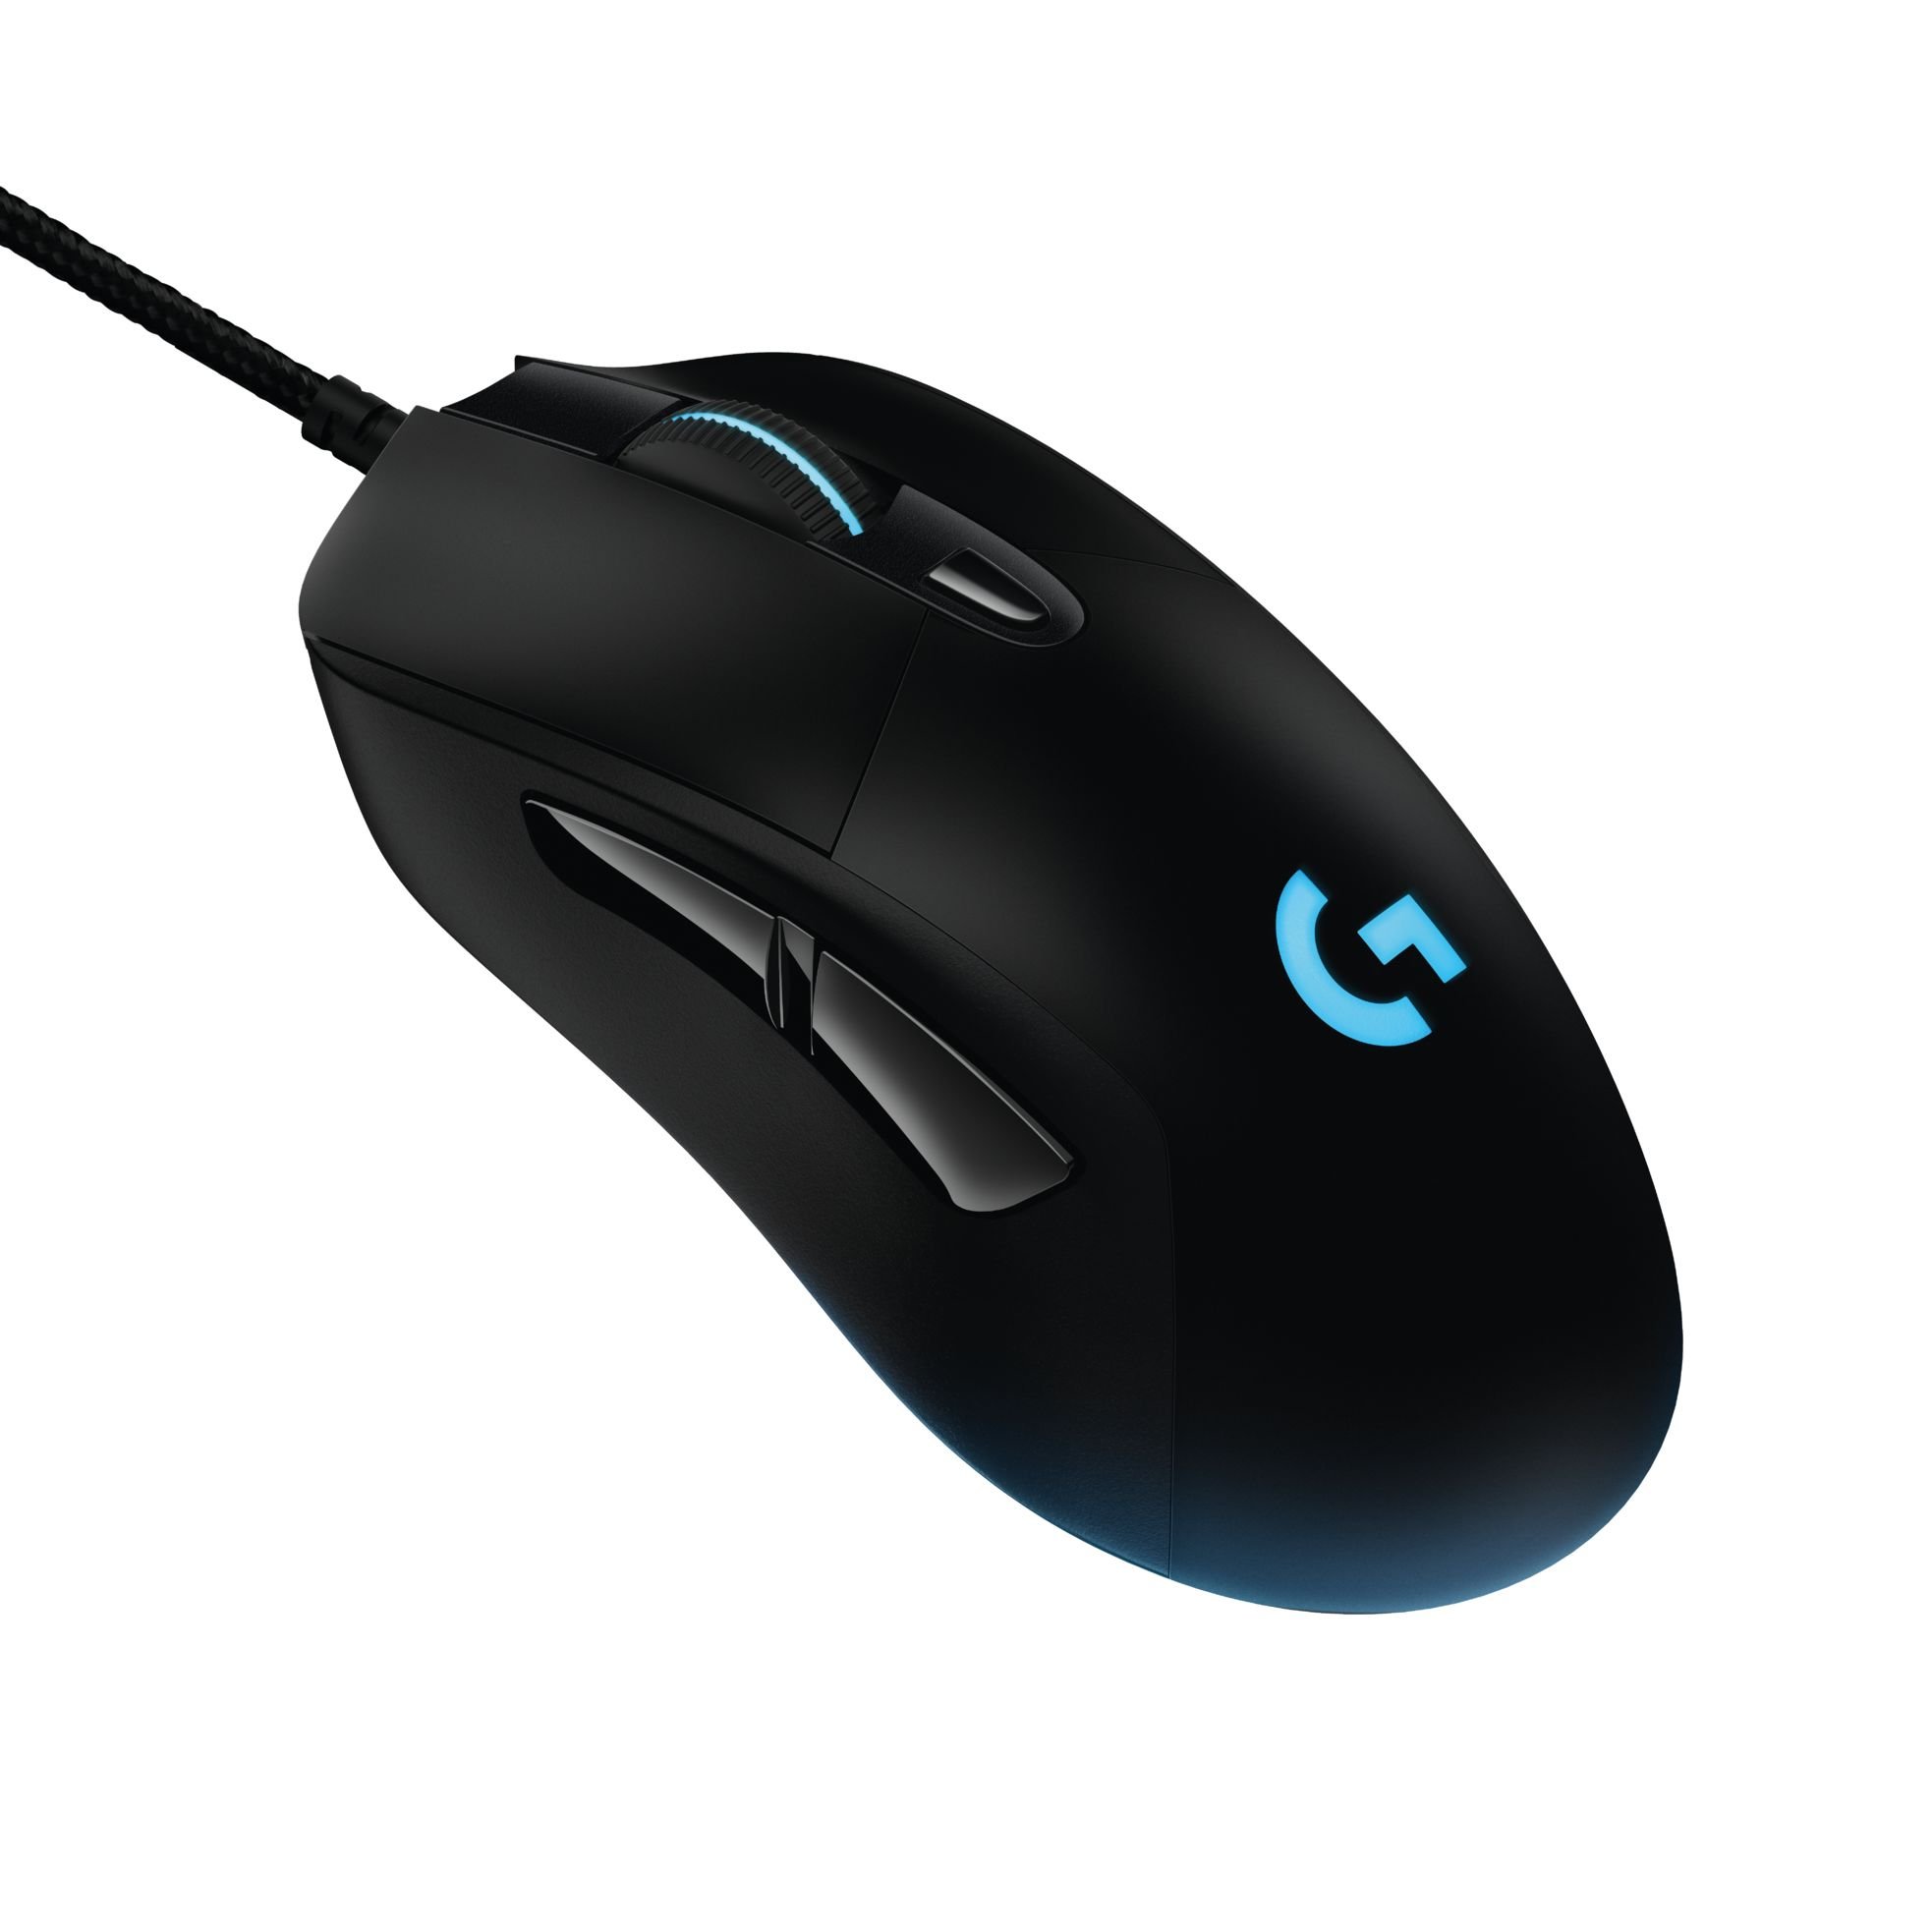 Logitech G403 Optical Gaming Mouse Corded, Prodigy, 910-004825 (Corded, Prodigy)